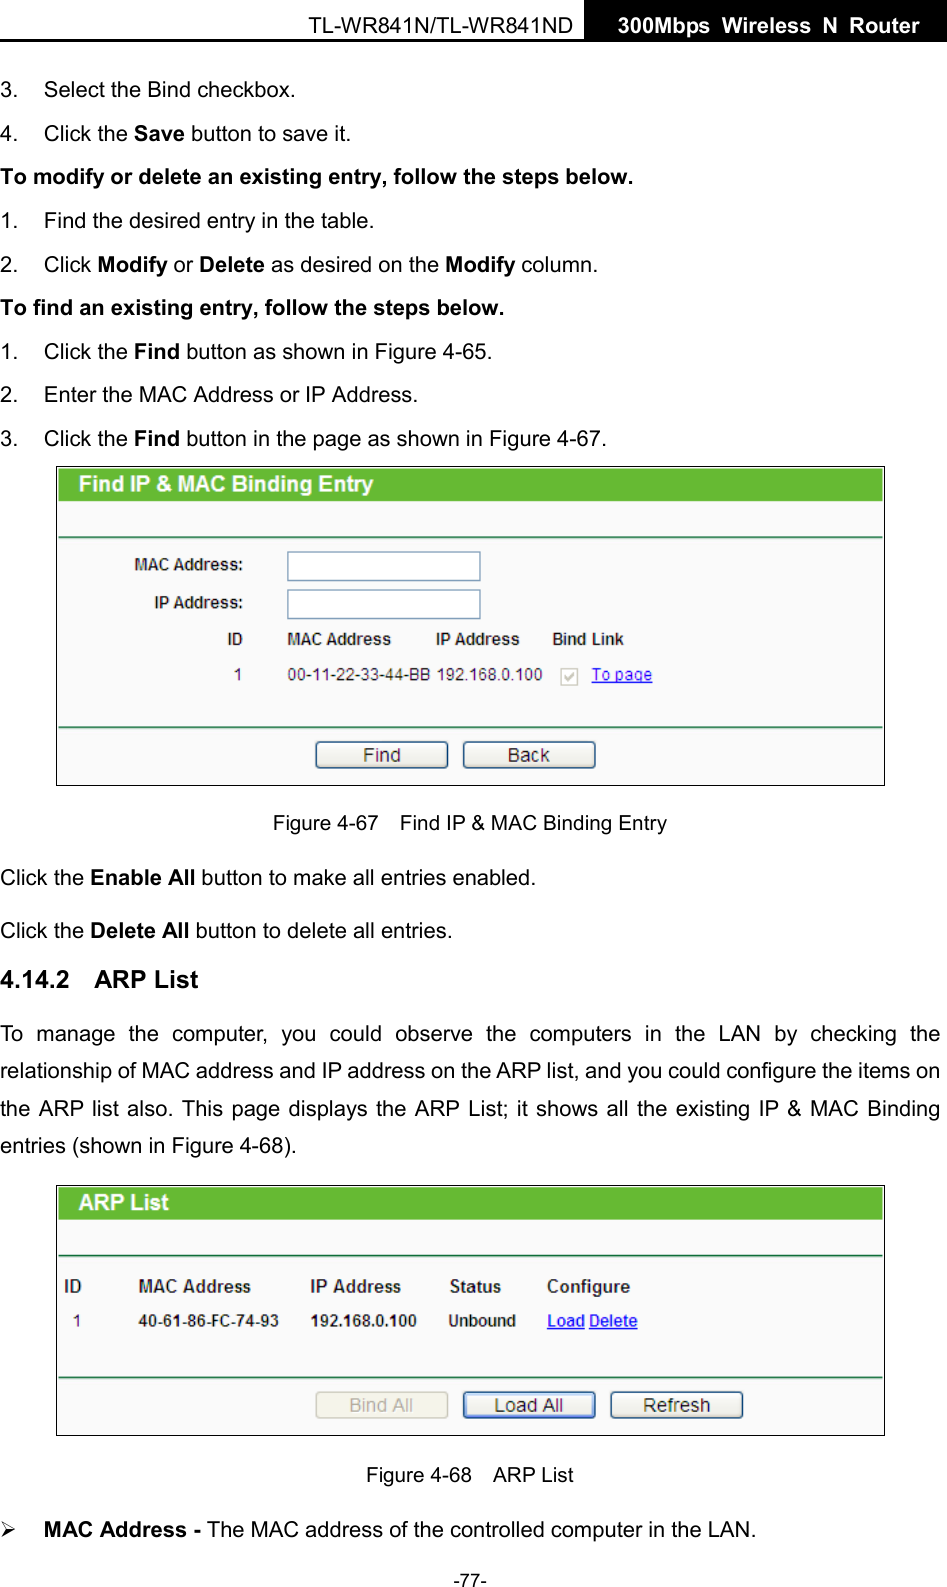  TL-WR841N/TL-WR841ND  300Mbps Wireless N  Router    3. Select the Bind checkbox.   4. Click the Save button to save it. To modify or delete an existing entry, follow the steps below. 1. Find the desired entry in the table.   2. Click Modify or Delete as desired on the Modify column.   To find an existing entry, follow the steps below. 1. Click the Find button as shown in Figure 4-65. 2. Enter the MAC Address or IP Address. 3. Click the Find button in the page as shown in Figure 4-67.  Figure 4-67  Find IP &amp; MAC Binding Entry Click the Enable All button to make all entries enabled. Click the Delete All button to delete all entries. 4.14.2 ARP List To manage the computer, you could observe the computers in the LAN by checking the relationship of MAC address and IP address on the ARP list, and you could configure the items on the ARP list also. This page displays the ARP List; it shows all the existing IP &amp; MAC Binding entries (shown in Figure 4-68).    Figure 4-68  ARP List  MAC Address - The MAC address of the controlled computer in the LAN.   -77- 